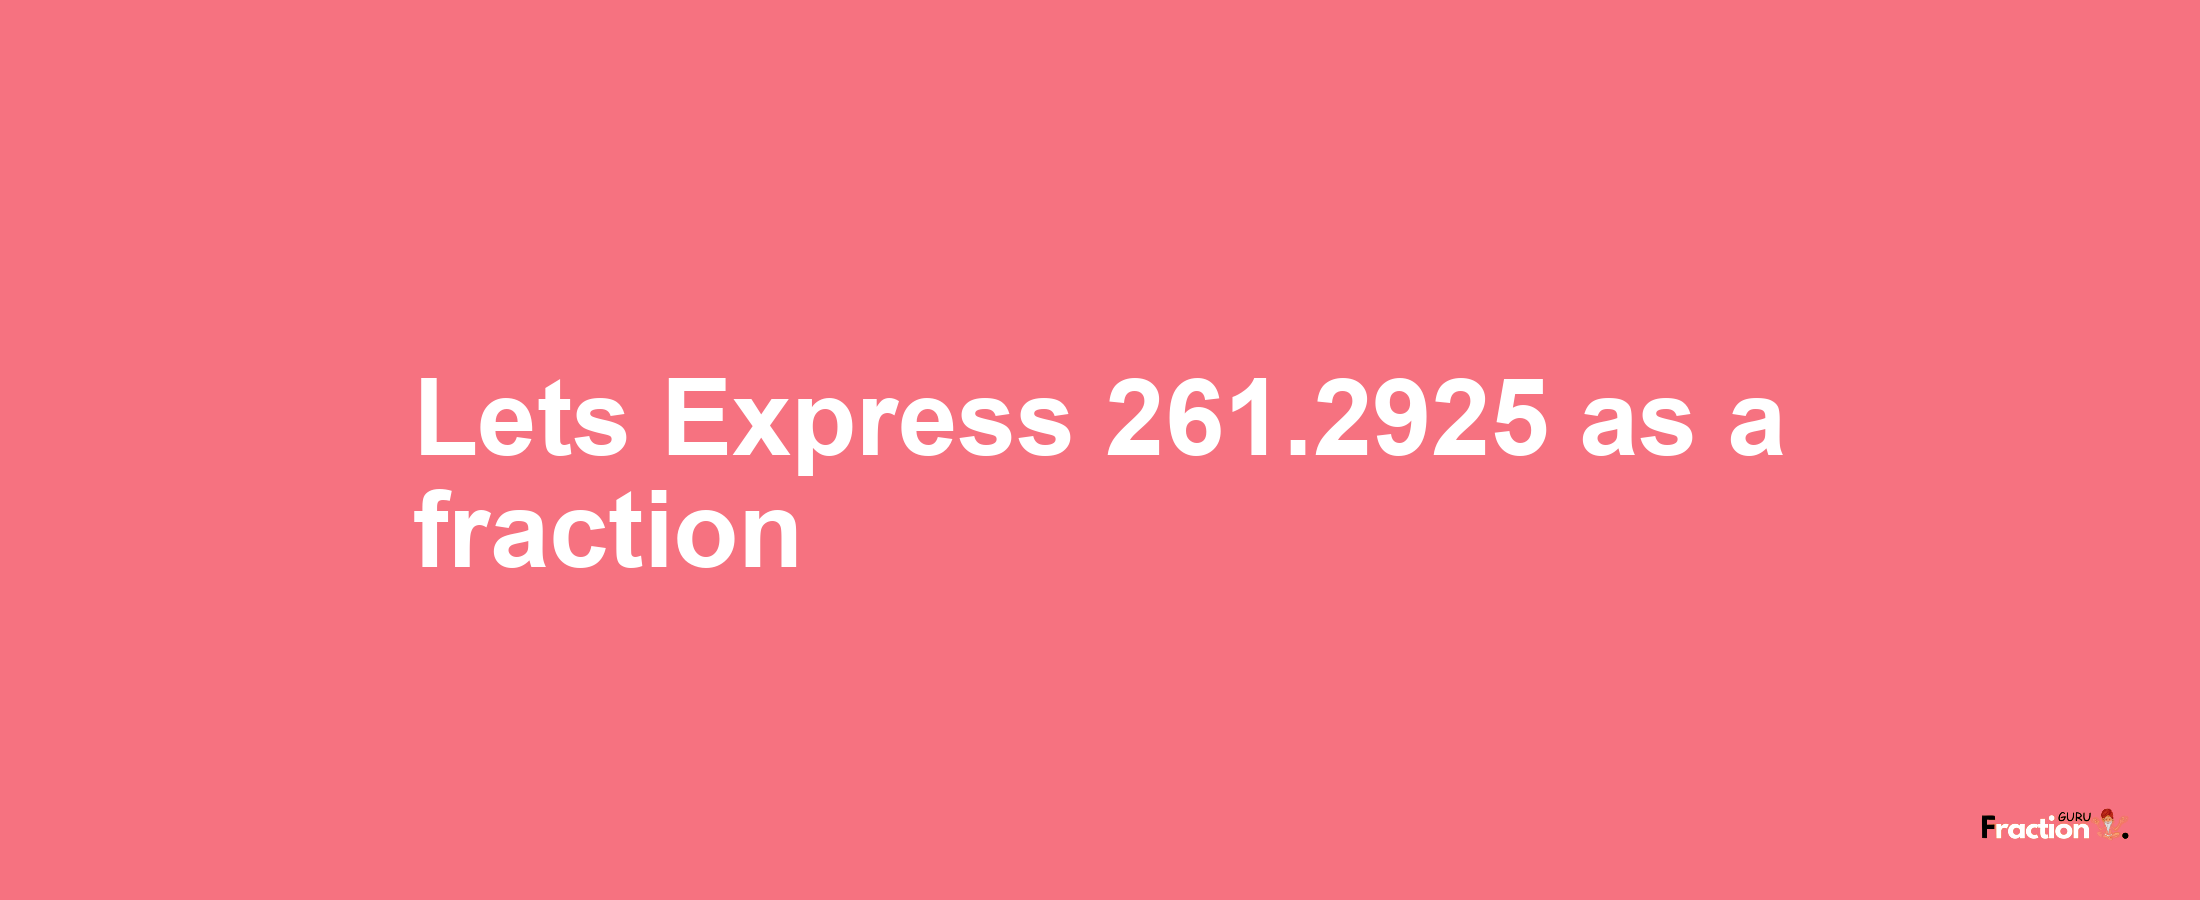 Lets Express 261.2925 as afraction